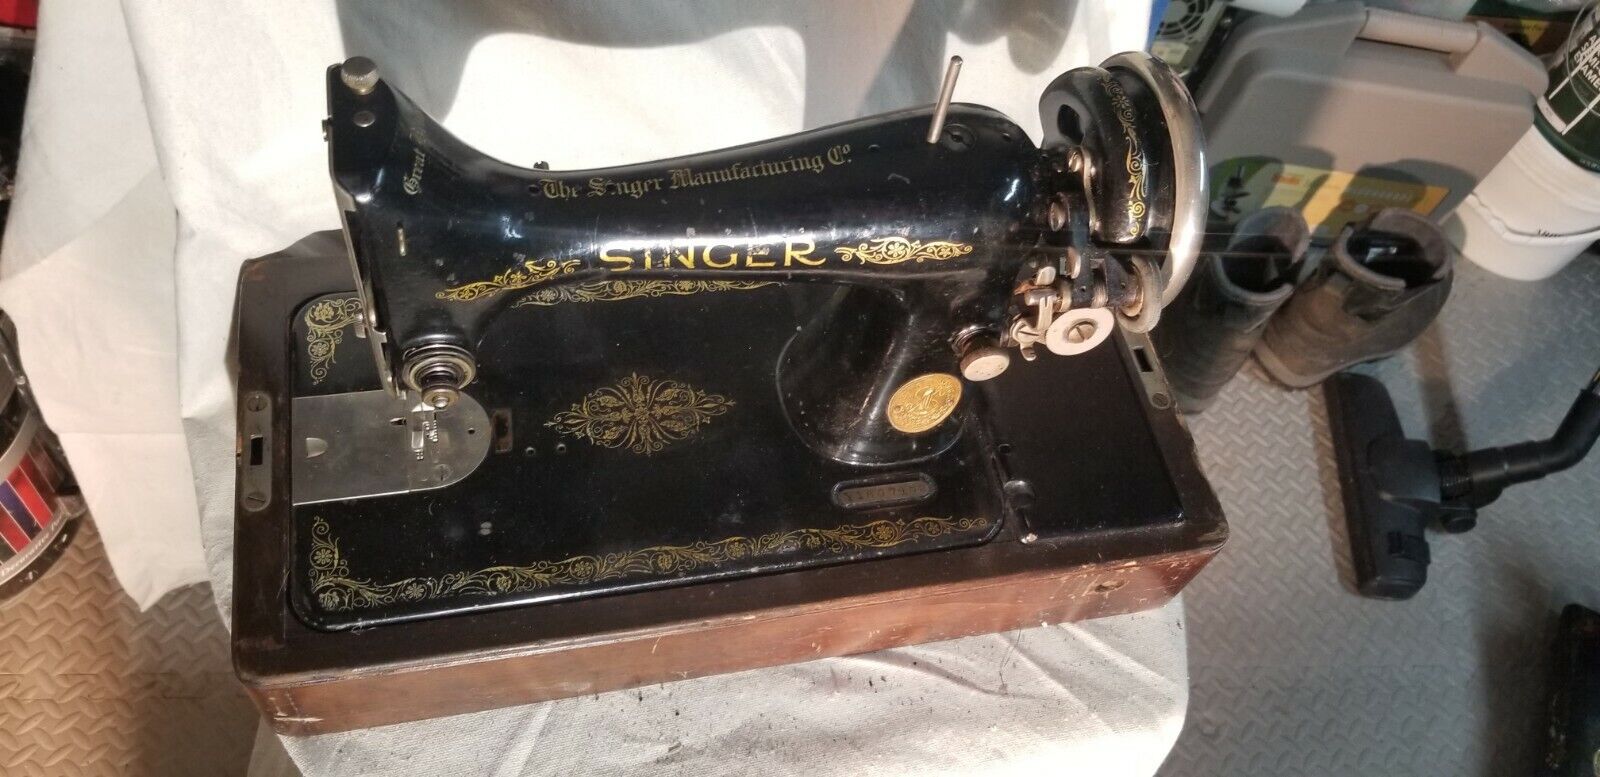 Vintage SINGER Sewing Machine from 1925